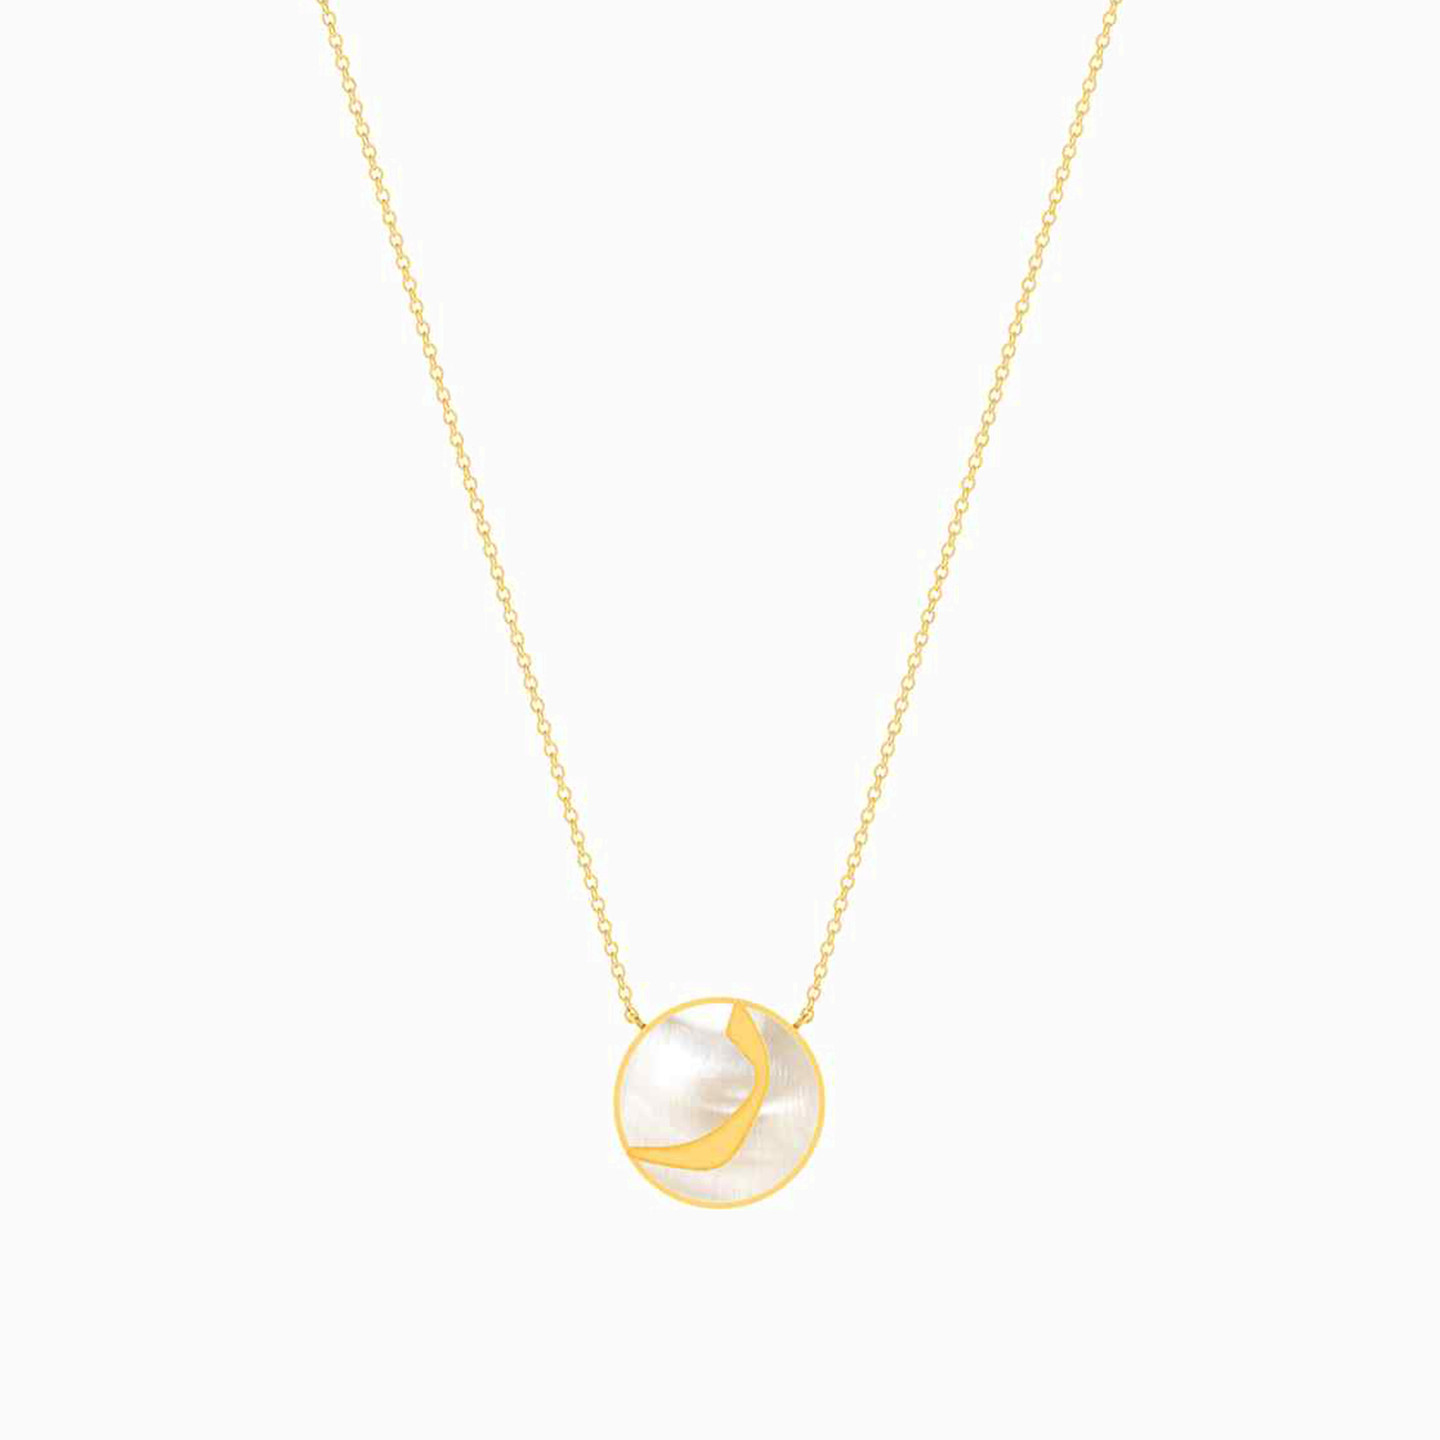 18K Gold Pearls Pendant Necklace - 2